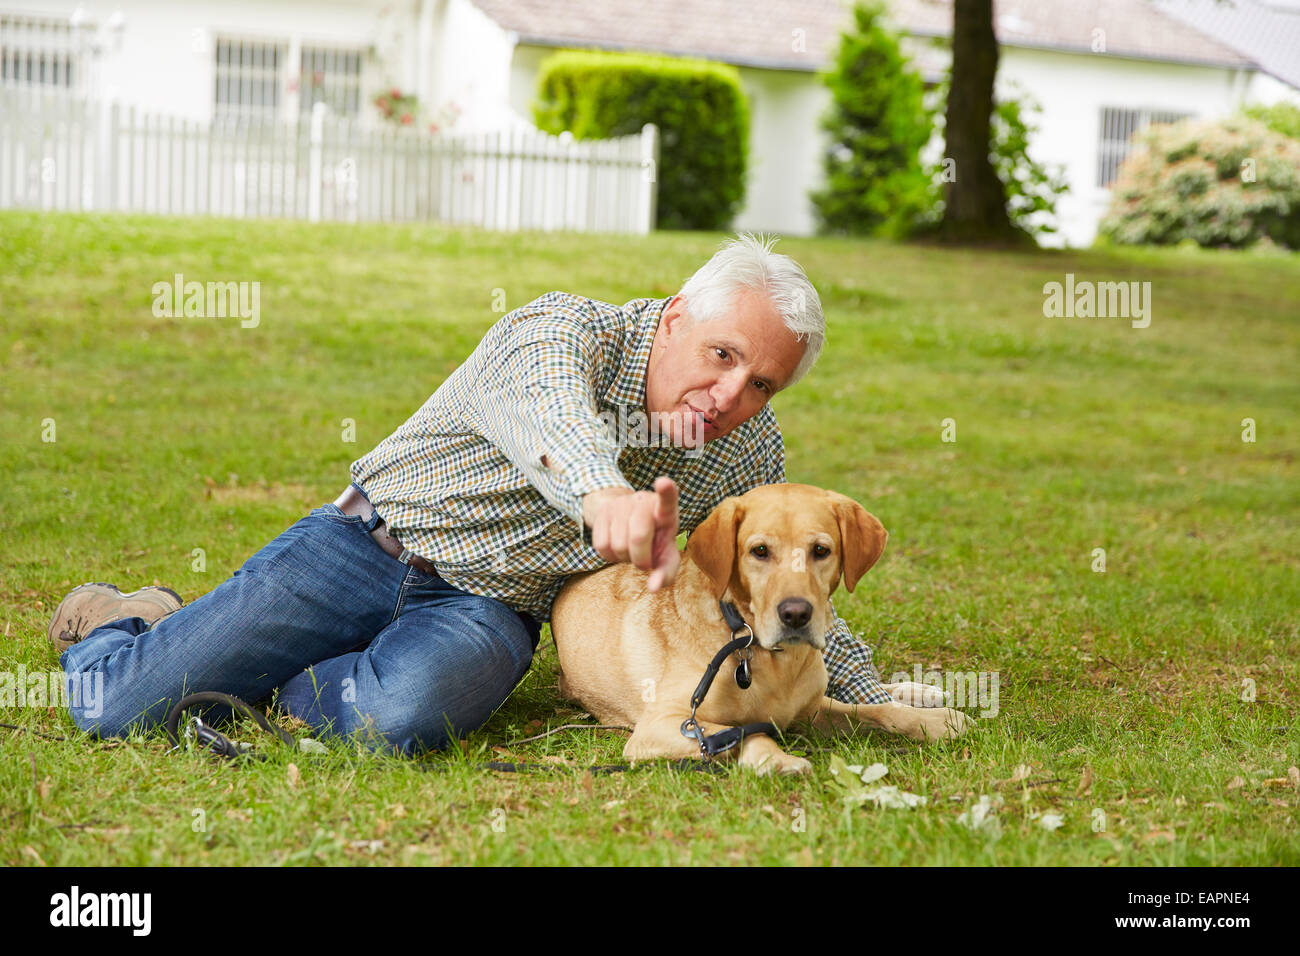 Senior man sitting with dog in garden in front of the house Stock Photo